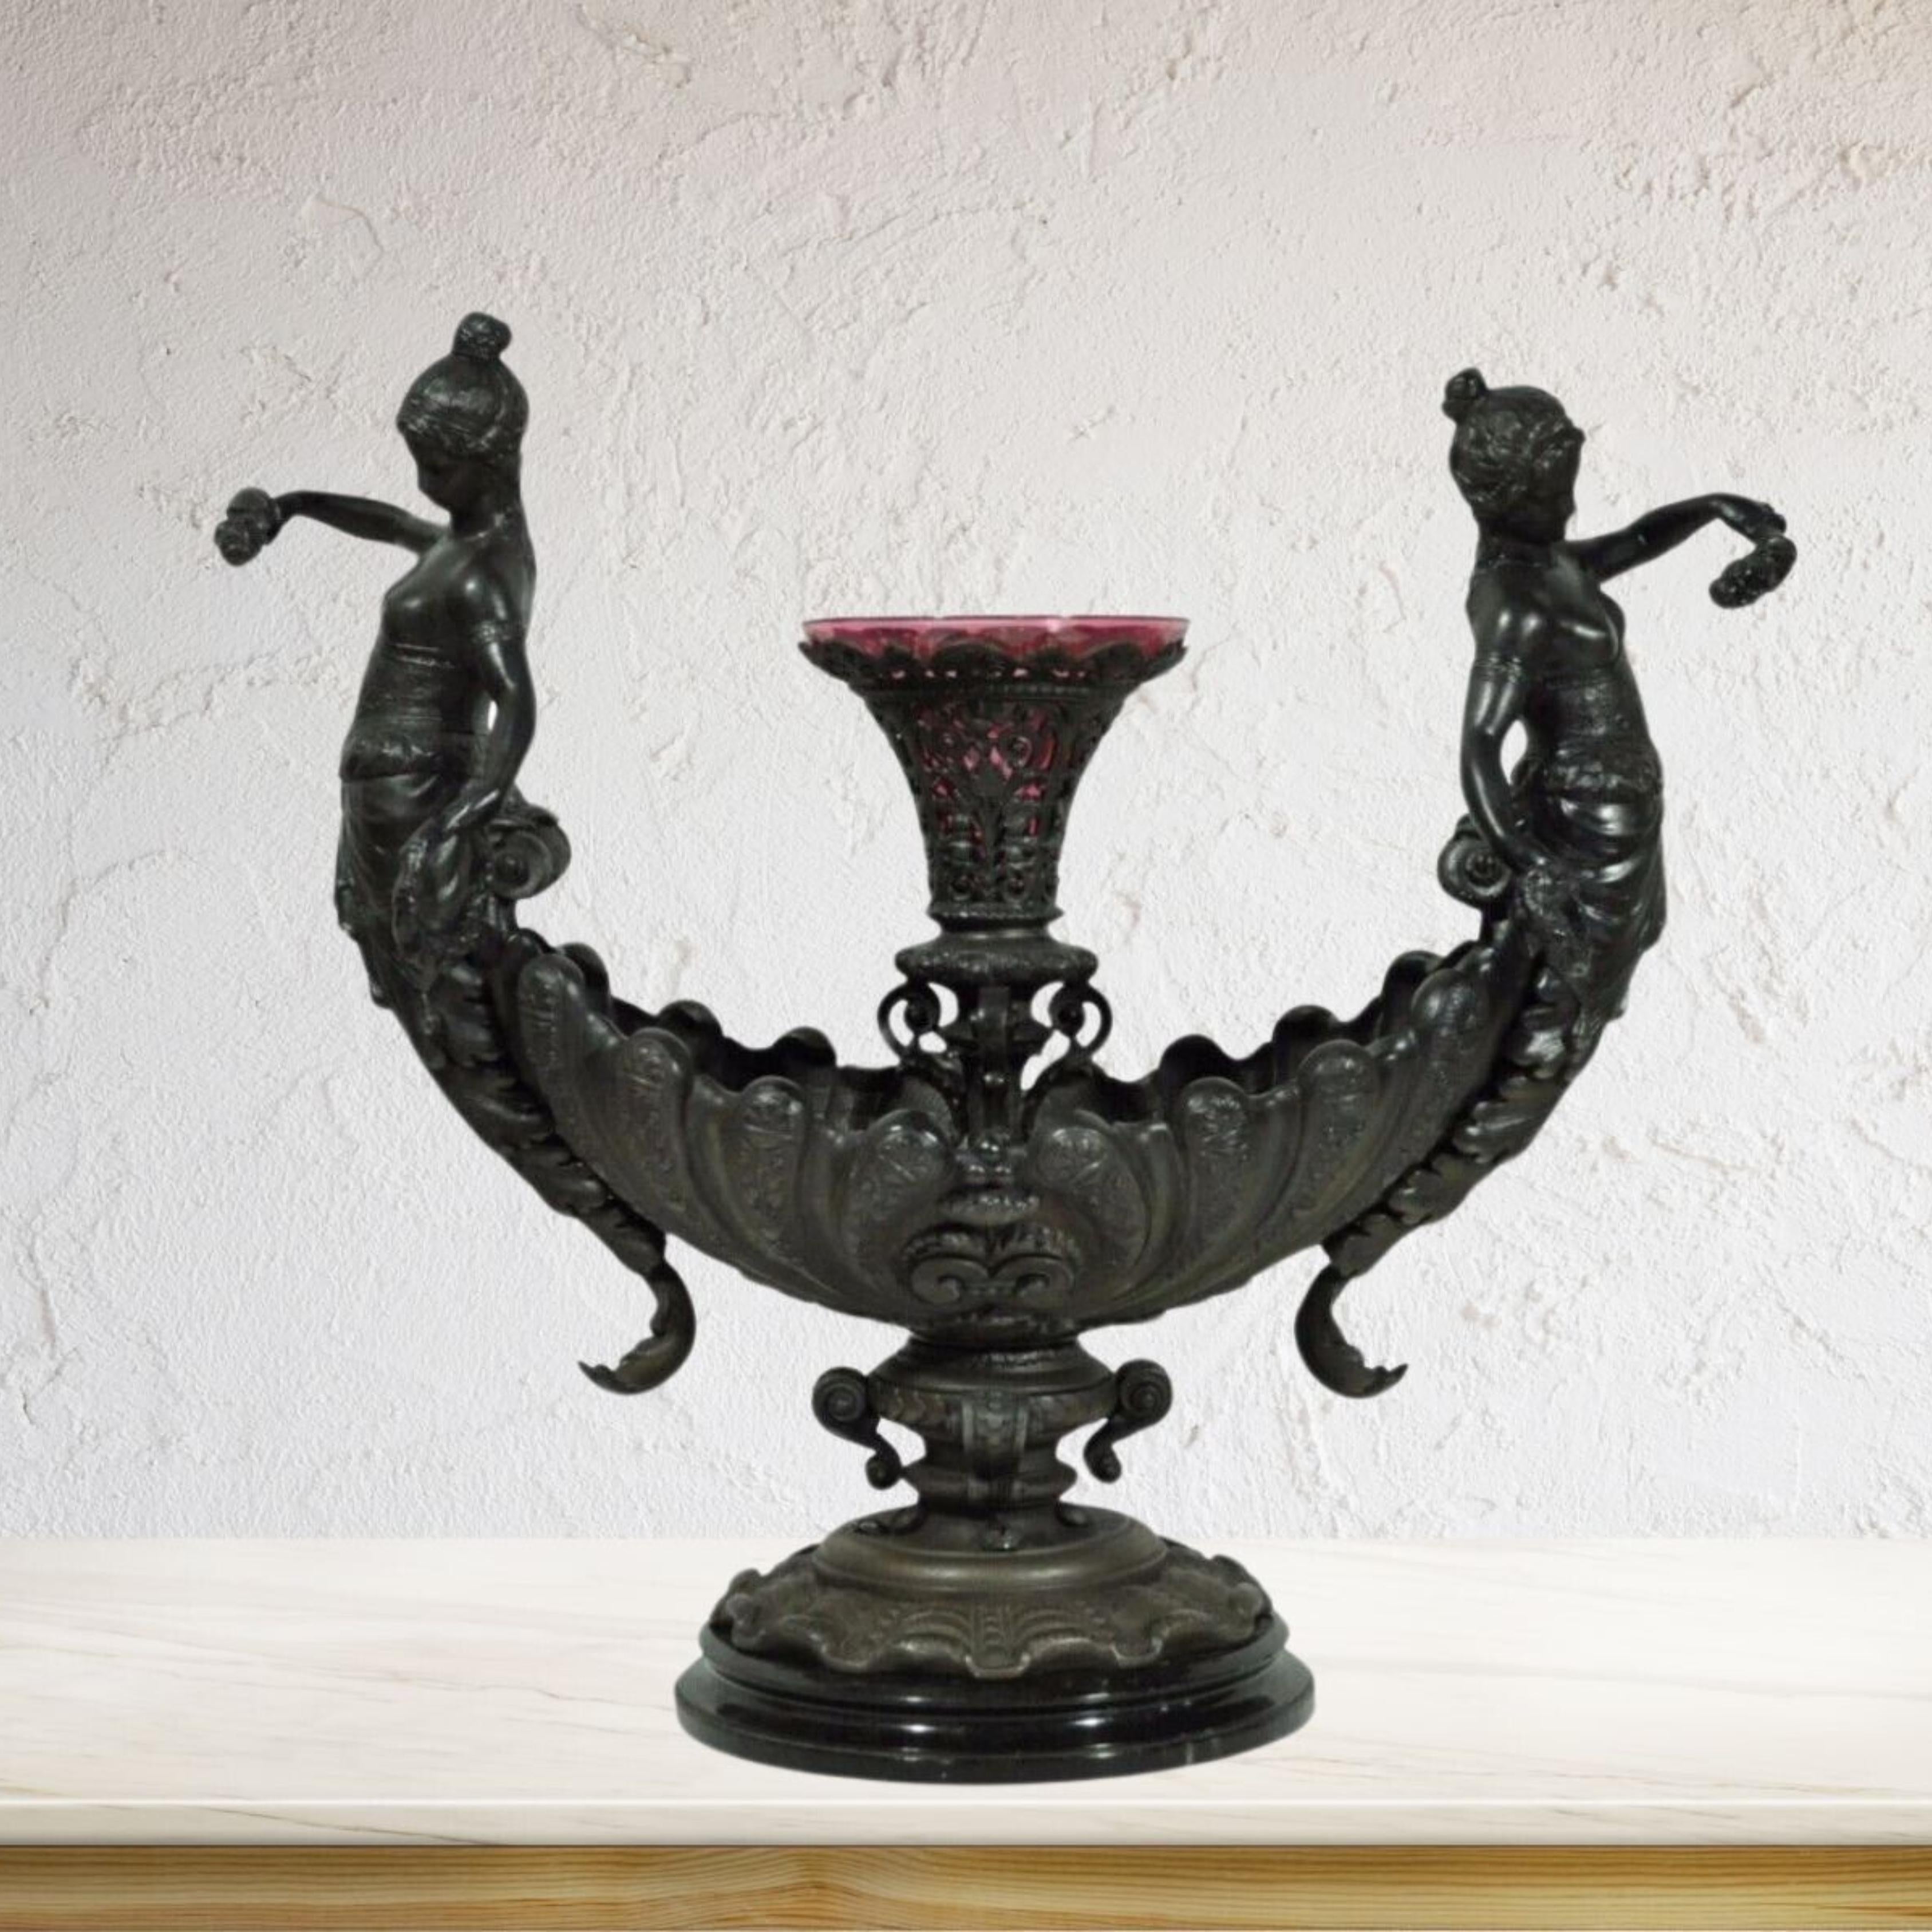 Antique Victorian Spelter & Marble Figural Mermaid Centerpiece Bowl Vase Epergne. Item features ornate detailed mermaids figures, black marble plinth, pinkish purple vase insert, substantial overall weight (approx 32 lbs.). Circa 1900. Measurements: